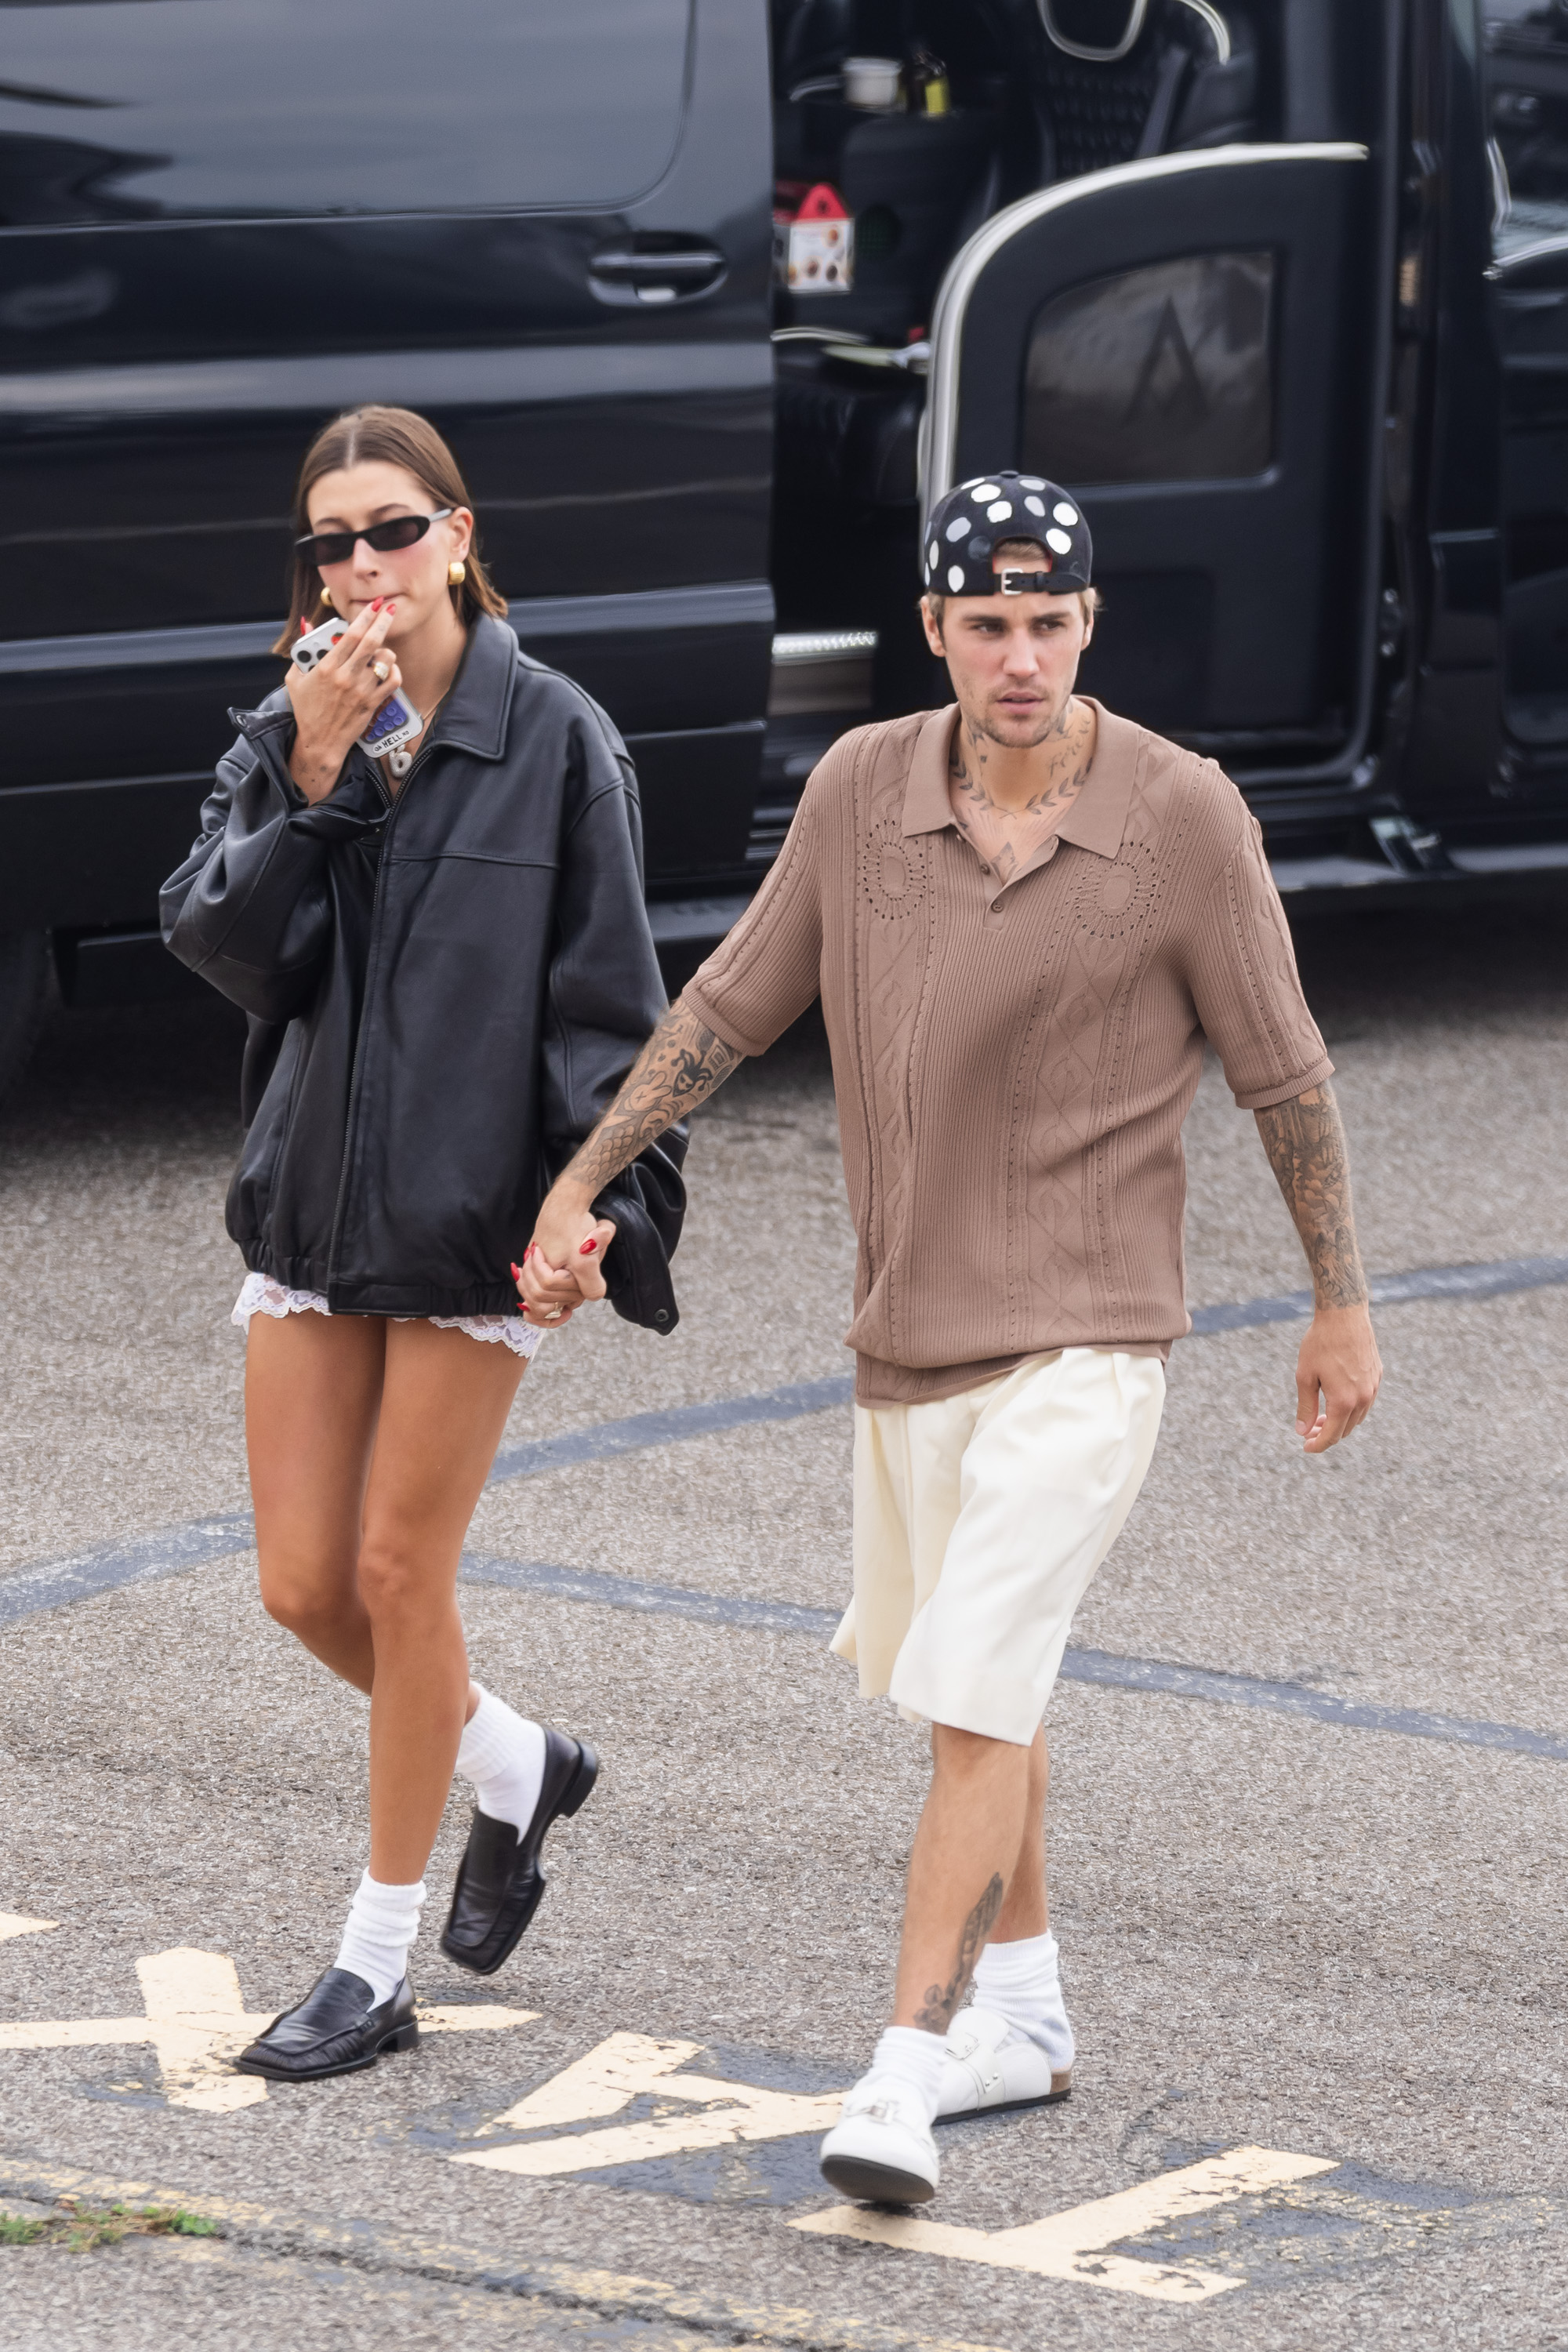 Hailey's Instagram post came after a source revealed the two are going through a rough patch in their marriage